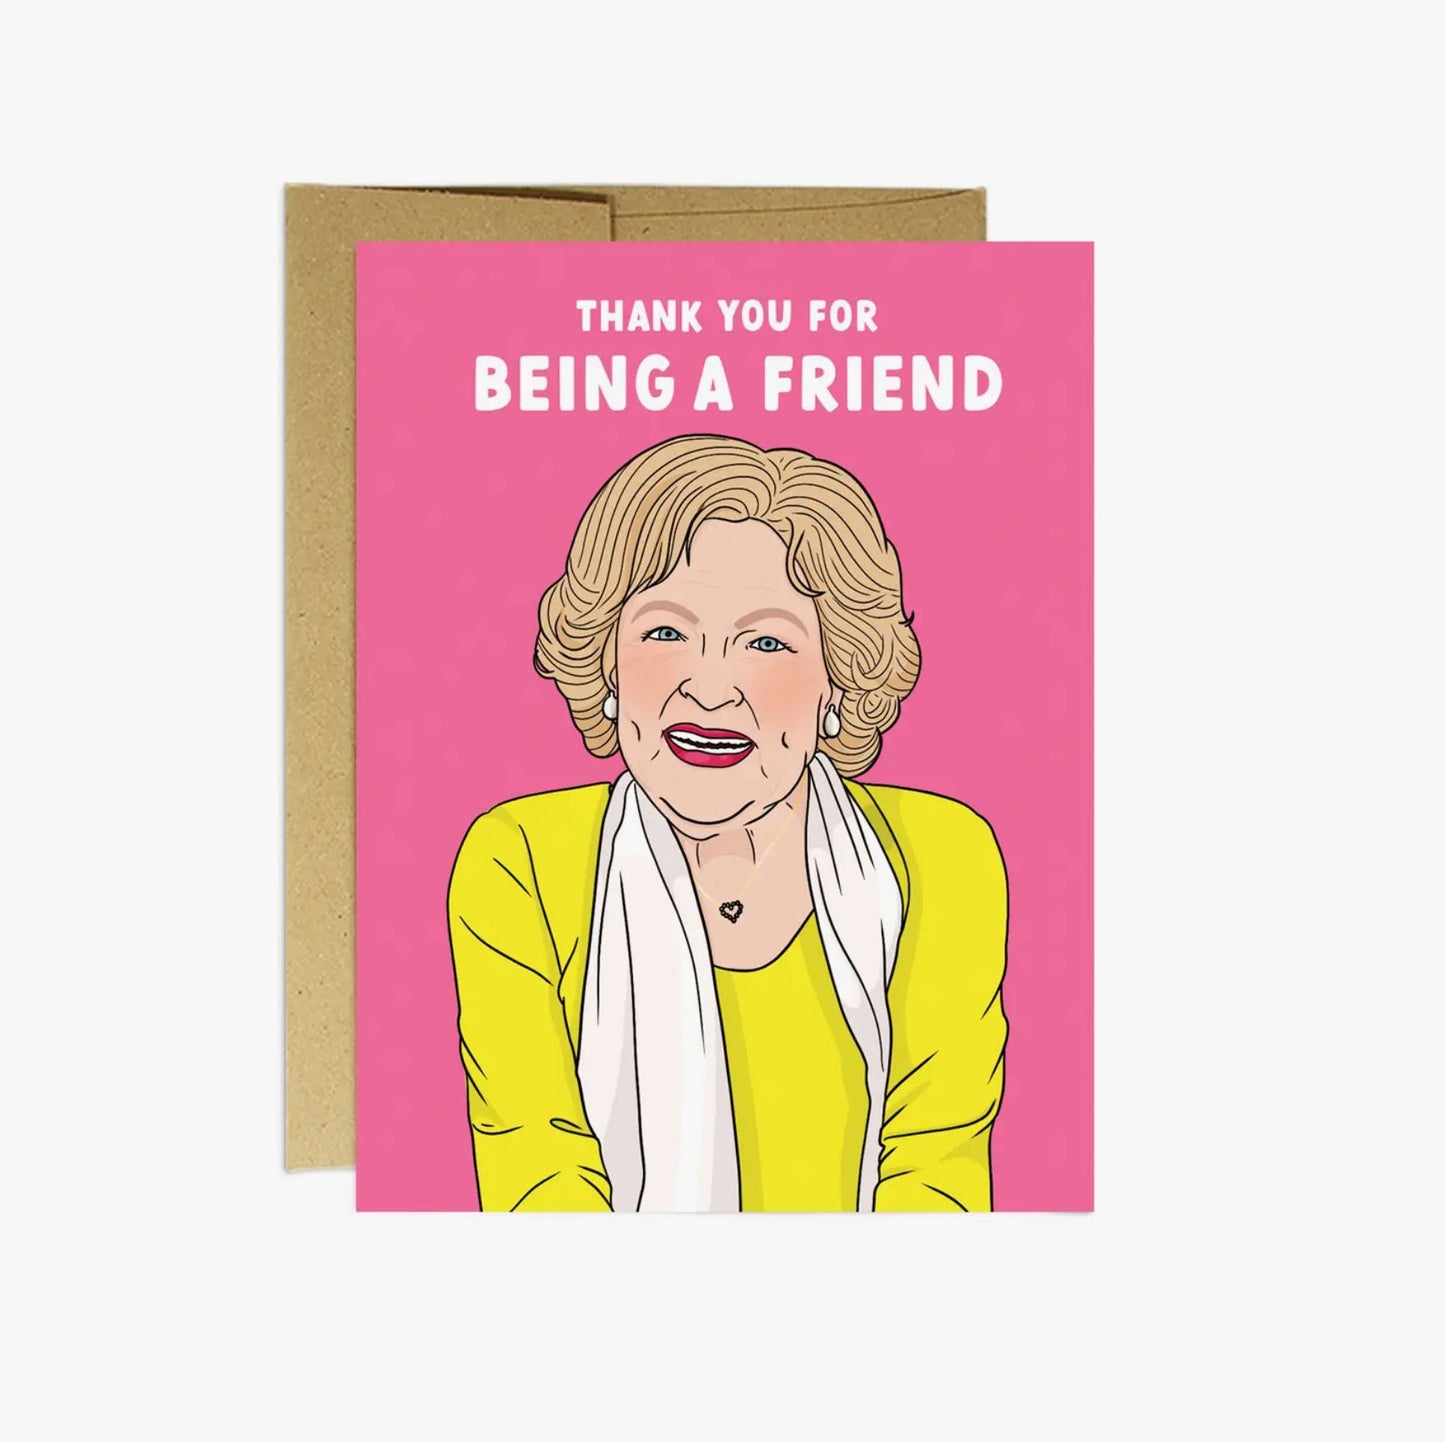 Betty "Thank You" Card